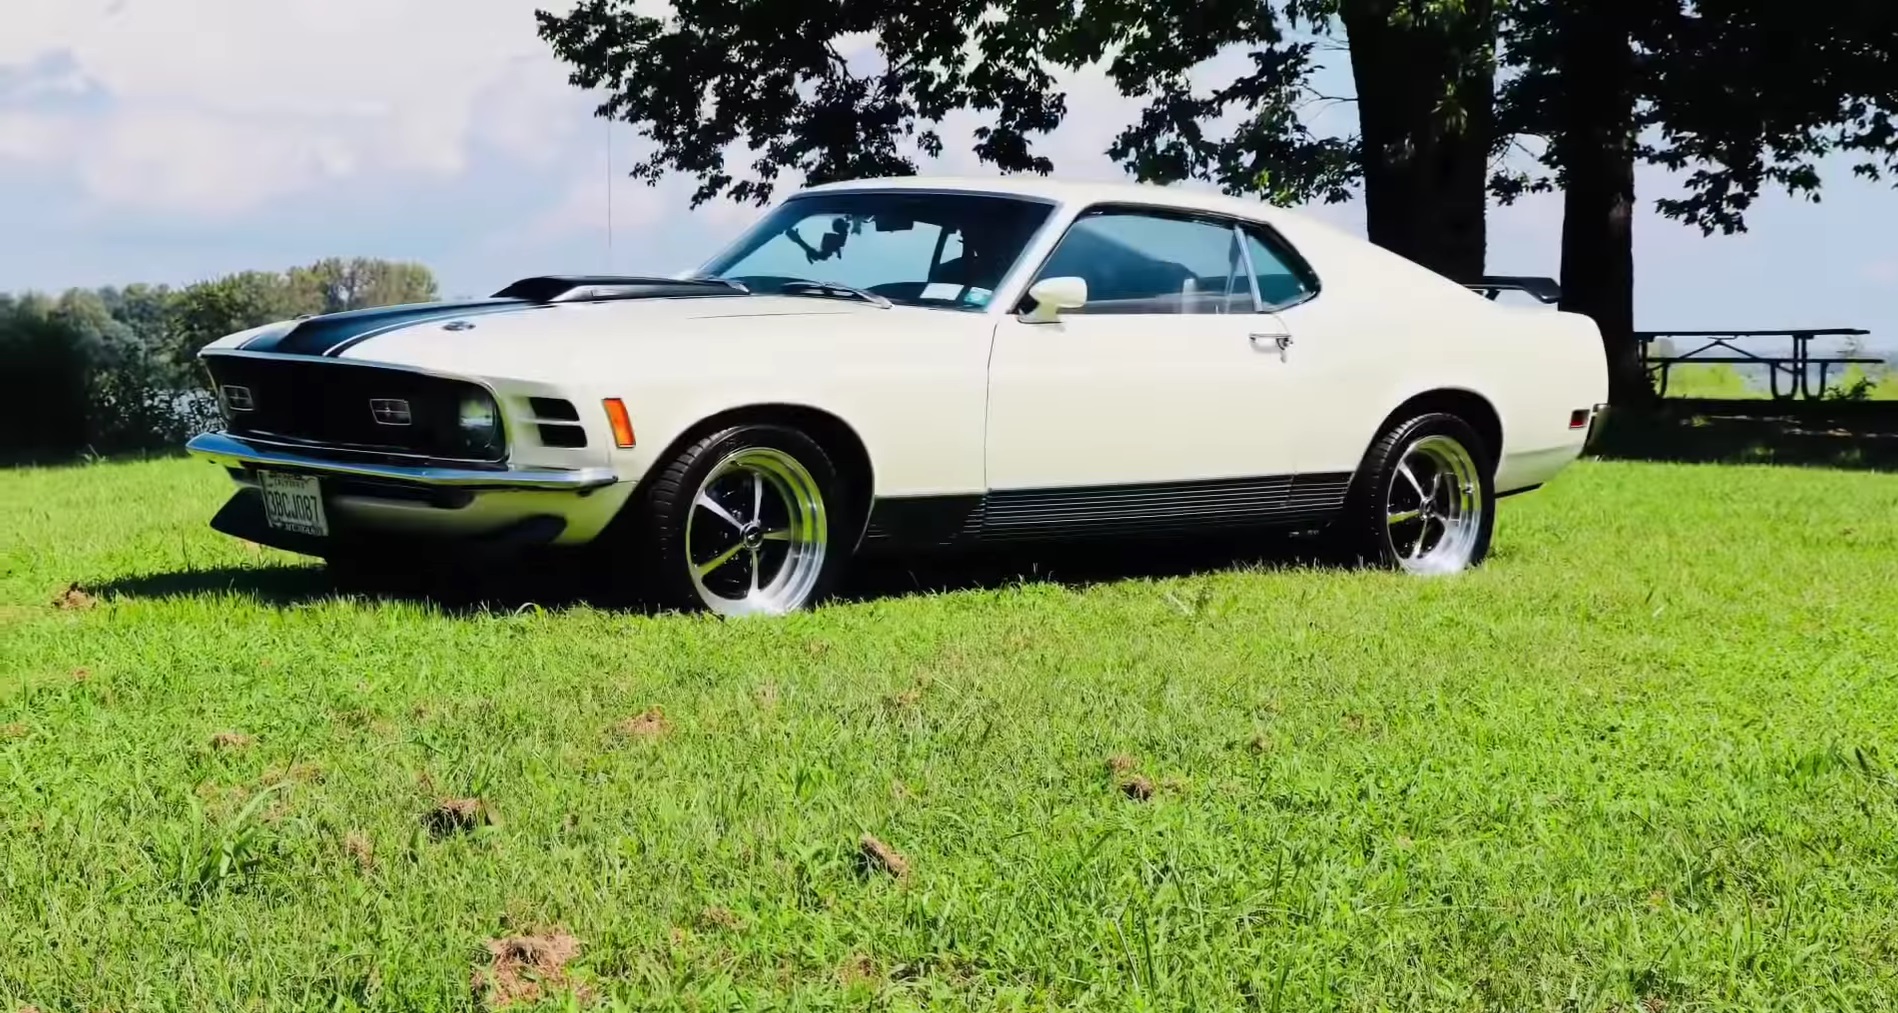 Video: Restored 1970 Ford Mustang Mach 1 Car Review